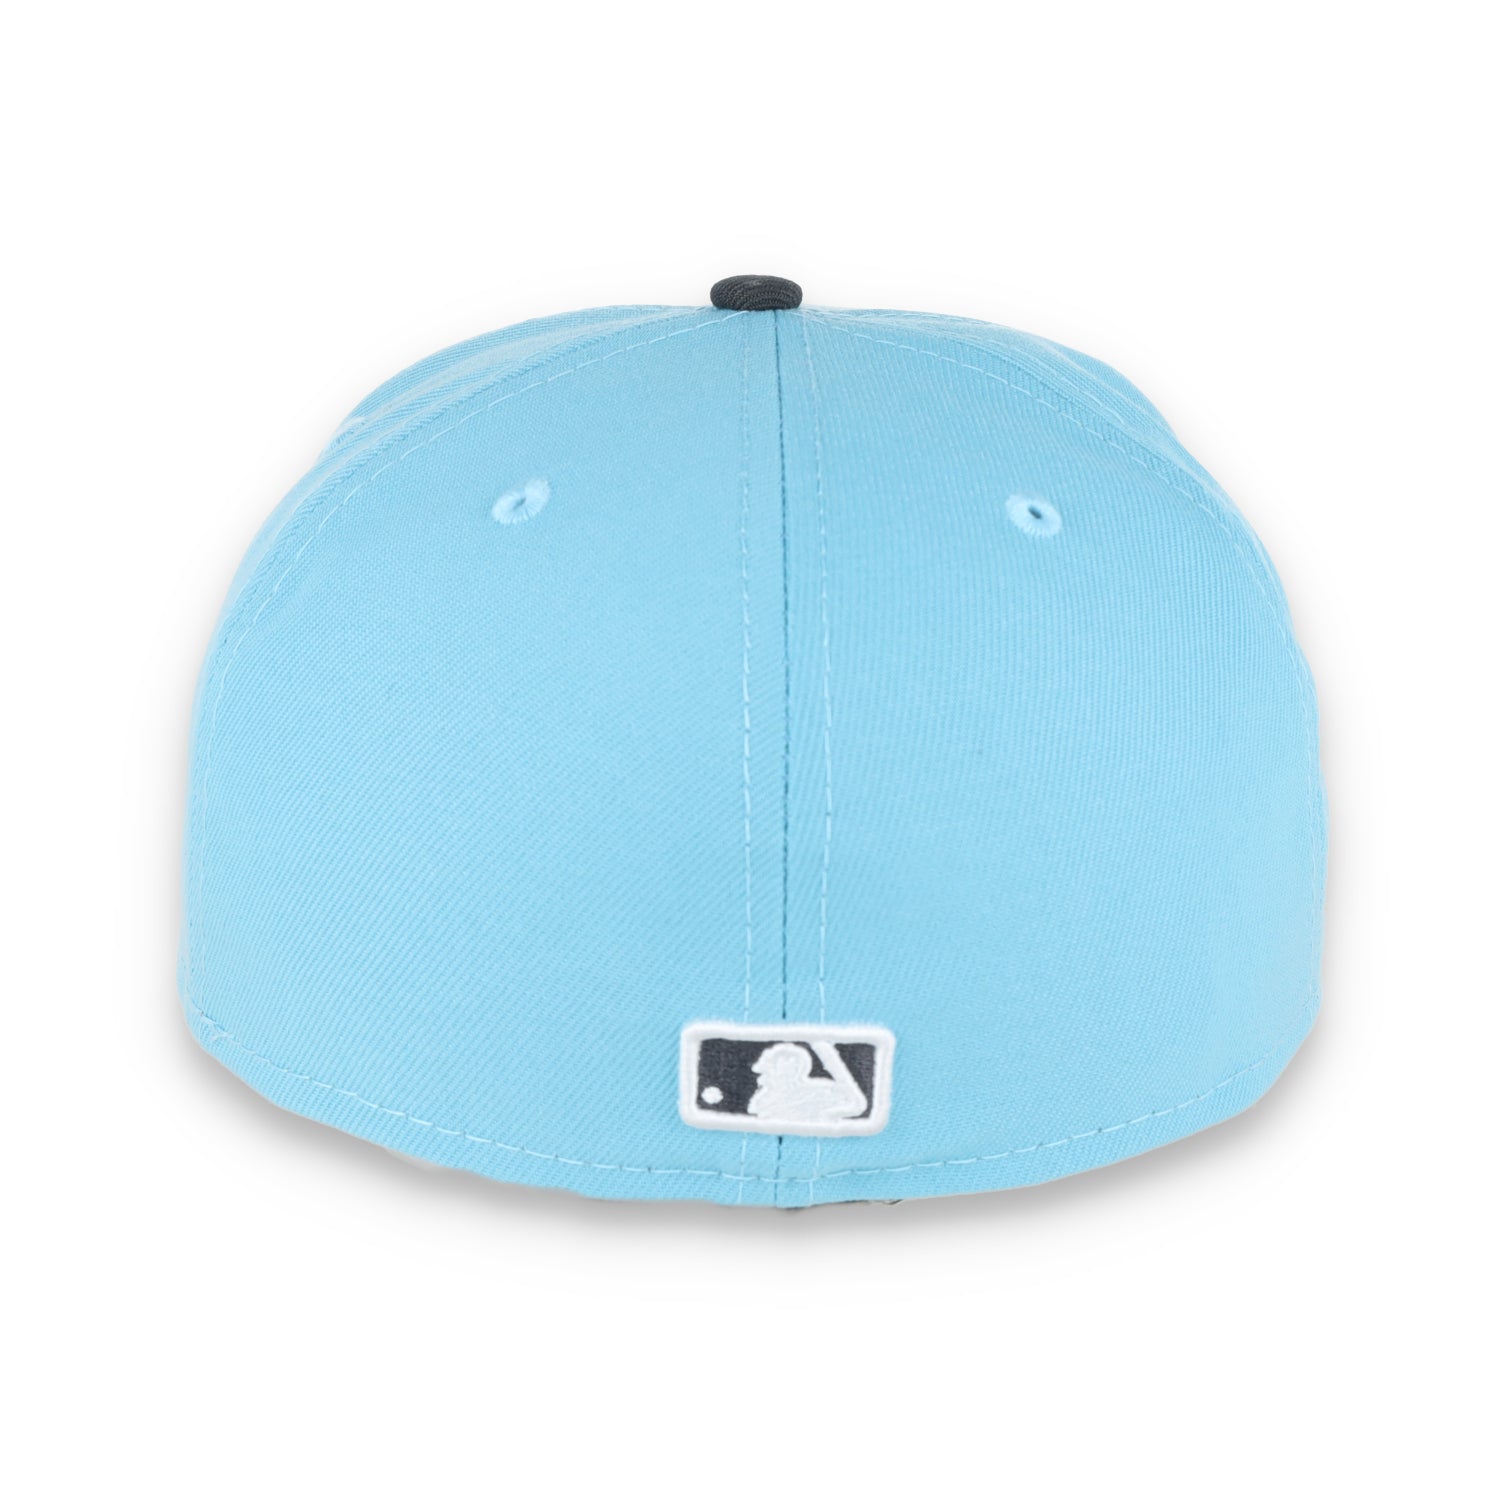 NEW ERA PITTSBURGH PIRATES 59FIFTY COLOR PACK-BABY BLUE/GREY